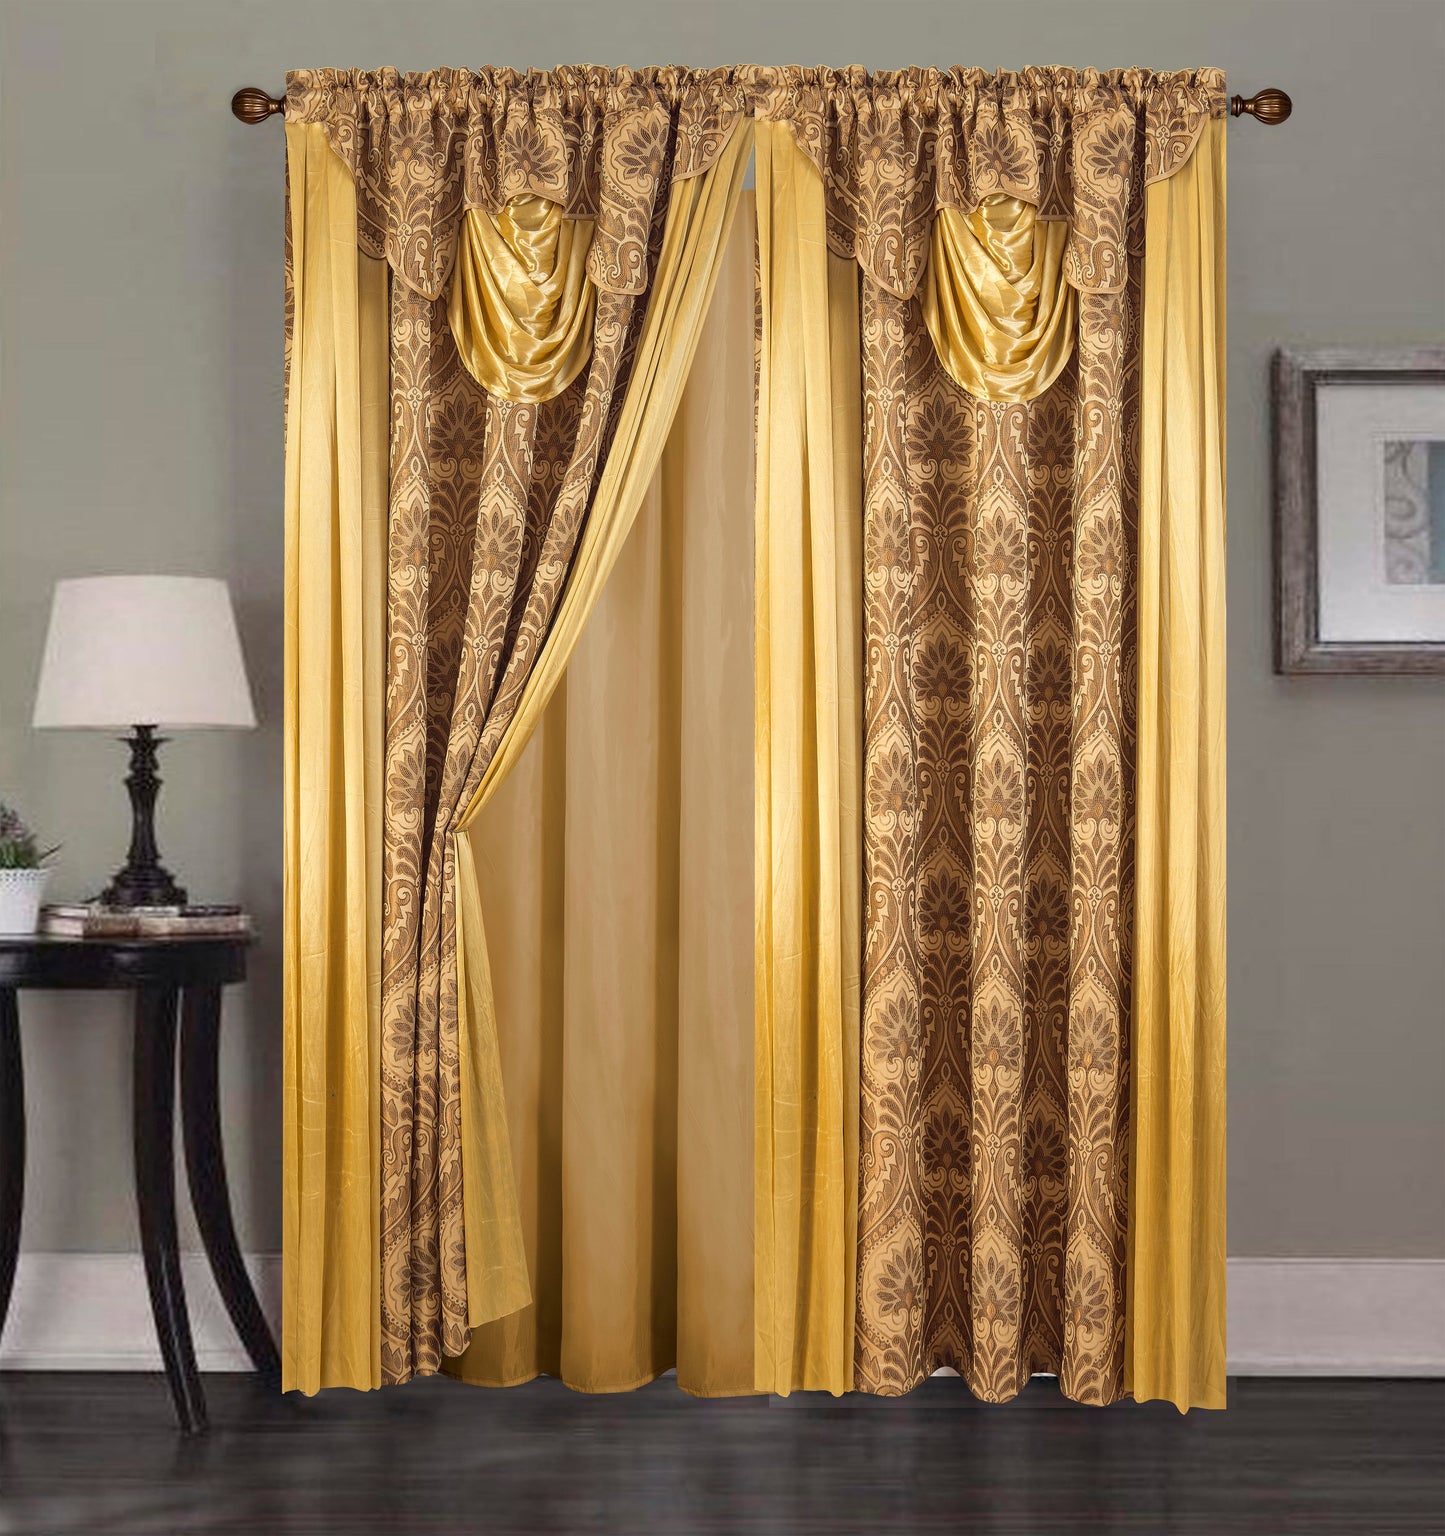 2PC CURTAIN SET W/ ATTACHED VALANCE & BACKING - Naomi